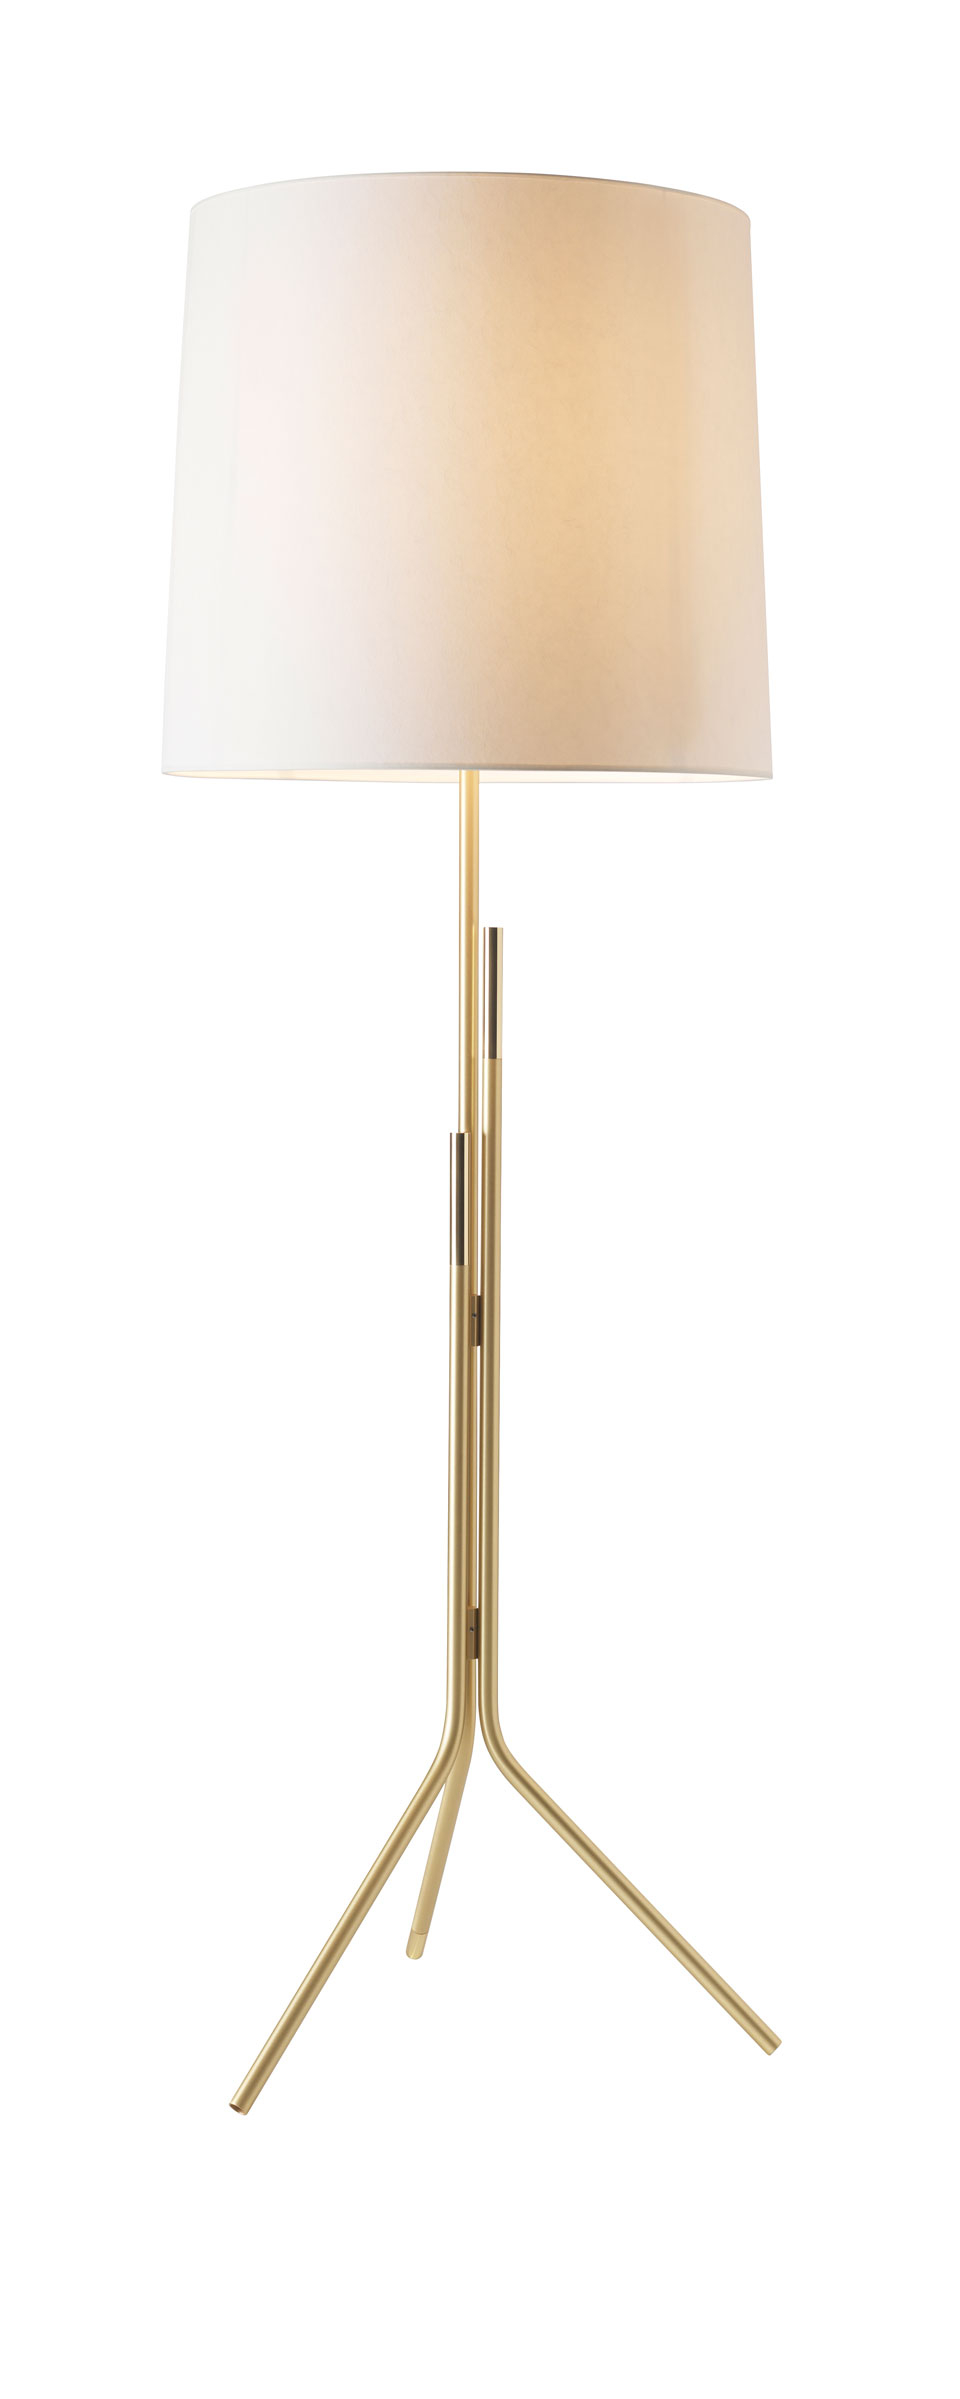 Contemporary Floor Lamp Brass Stand Cylindrical Shade In White Drop Paper Design Herv Langlais for dimensions 960 X 2399